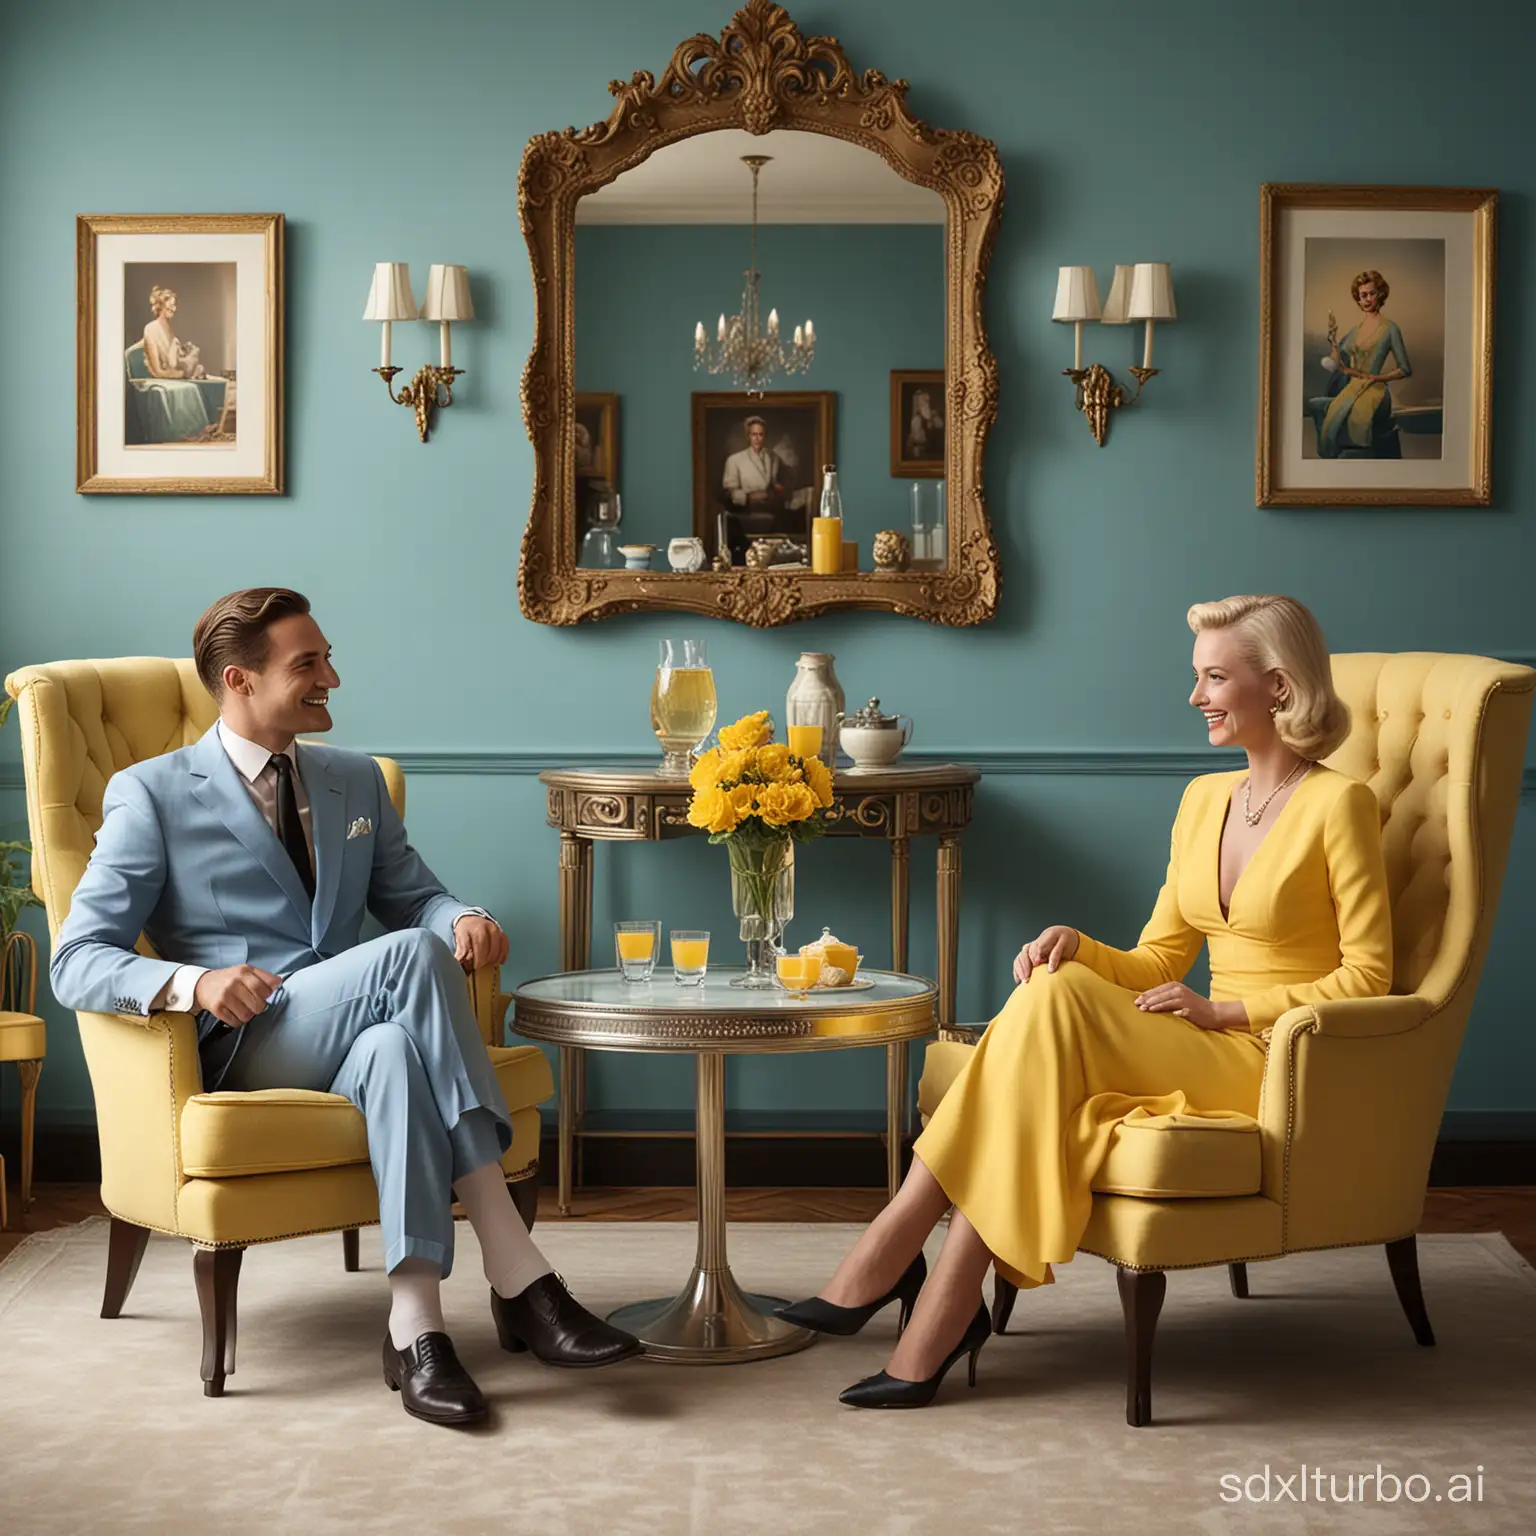 In a photorealistic style, recreate the 1950s ambiance of a living room scene with pastel blue walls and elegant frames and vintage decor. A man in a sharp blue suit and a blonde woman in an elegant yellow dress sit in mid-century modern chairs, with a round glass table between them holding a large ornate silver serving pot and glasses with a yellow drink. They are toasting with the drinks, smiling and enjoying a lively conversation in a room that captures the sophistication and style of the era.